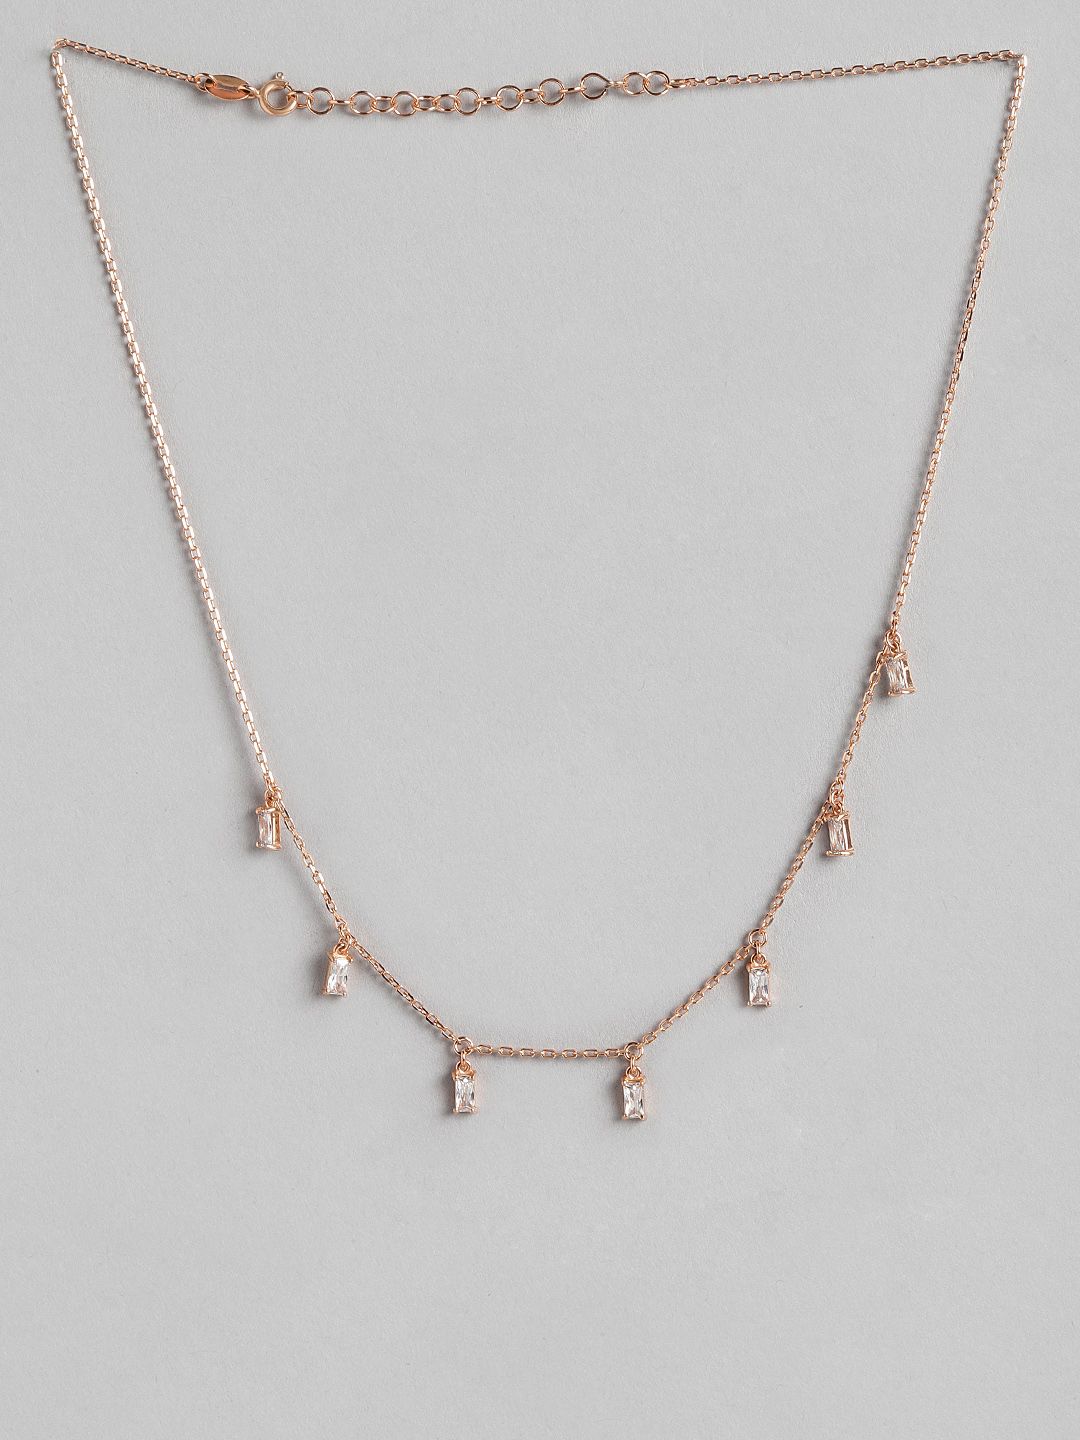 Carlton London Rose Gold-Plated & White Brass Necklace Price in India